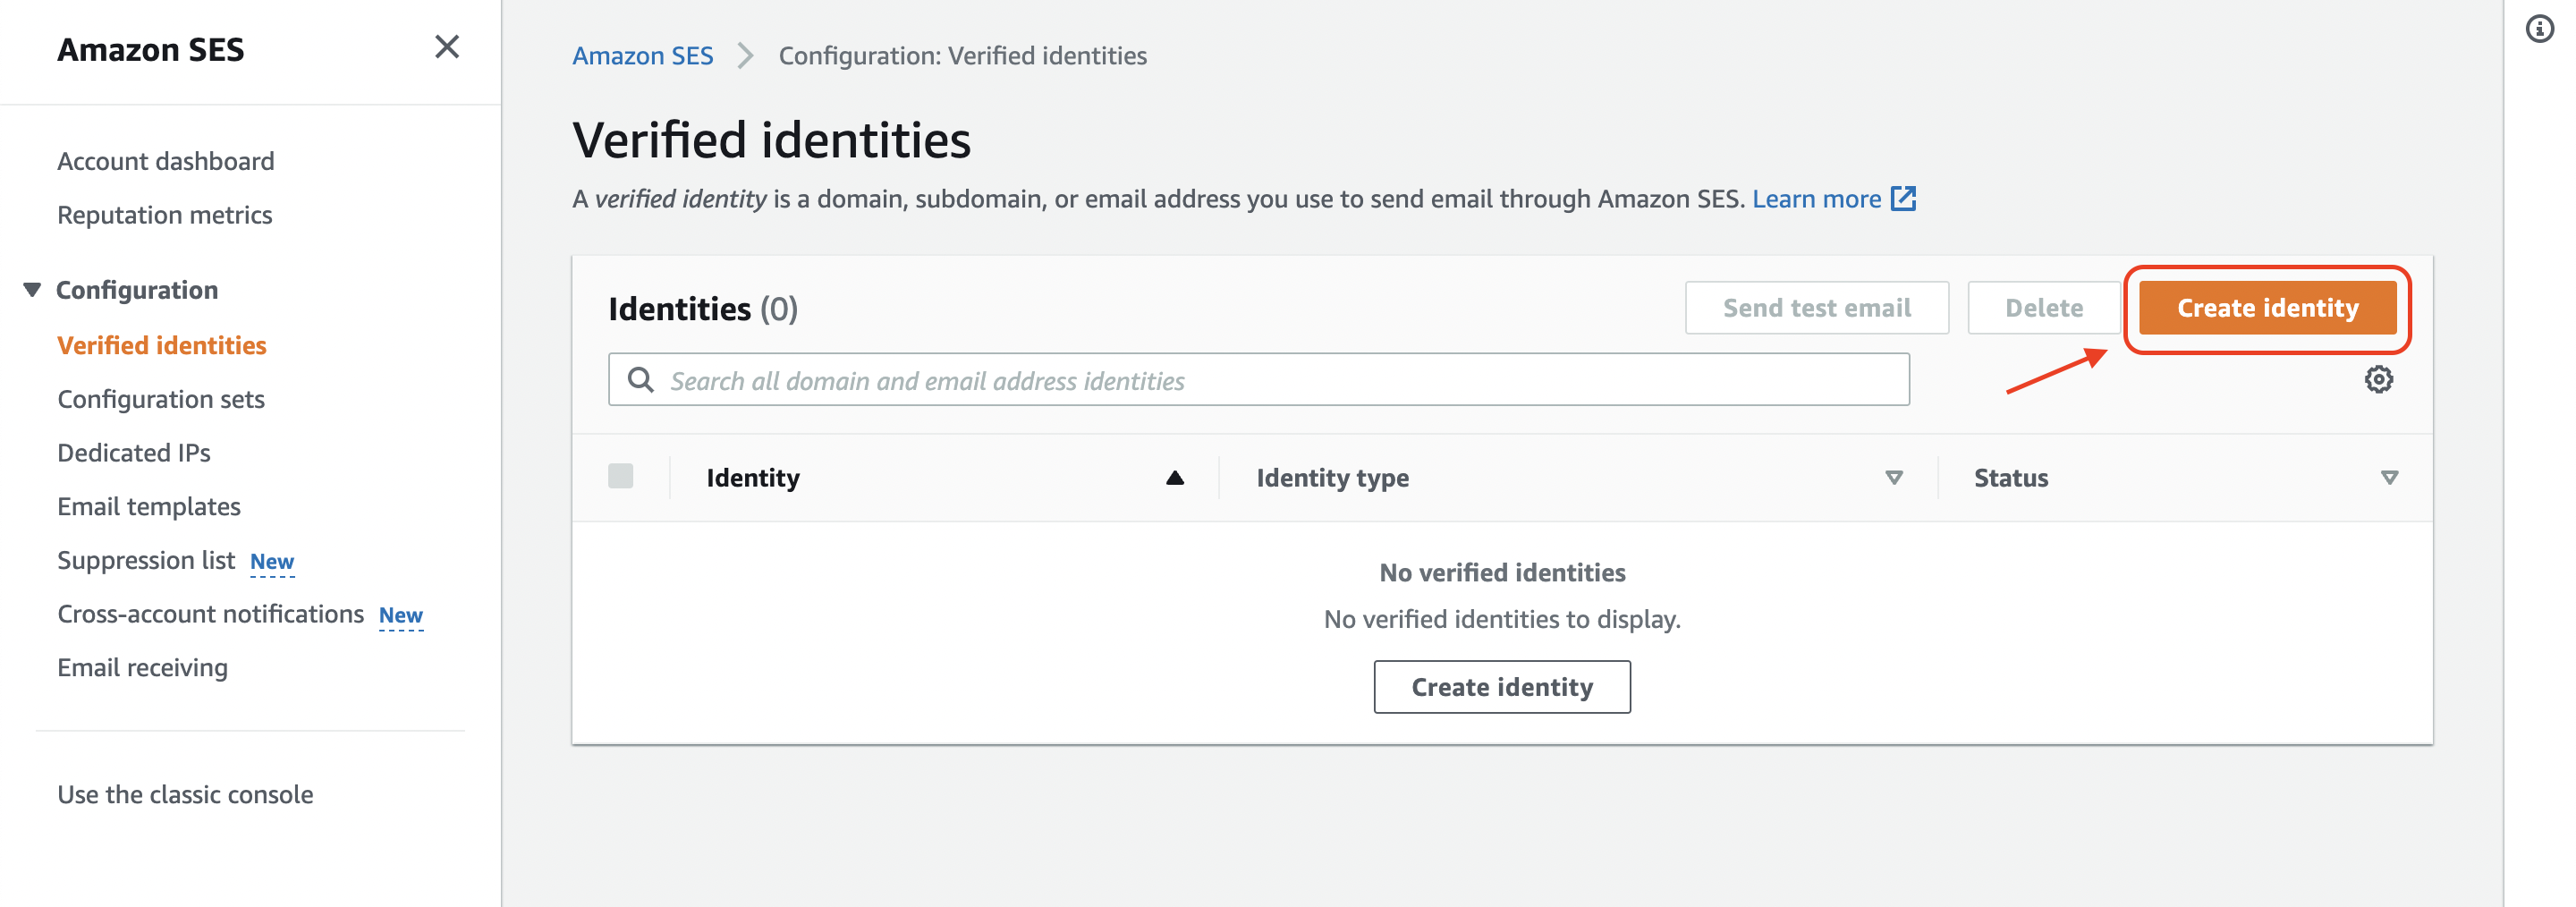 click Create identity from Verified identities